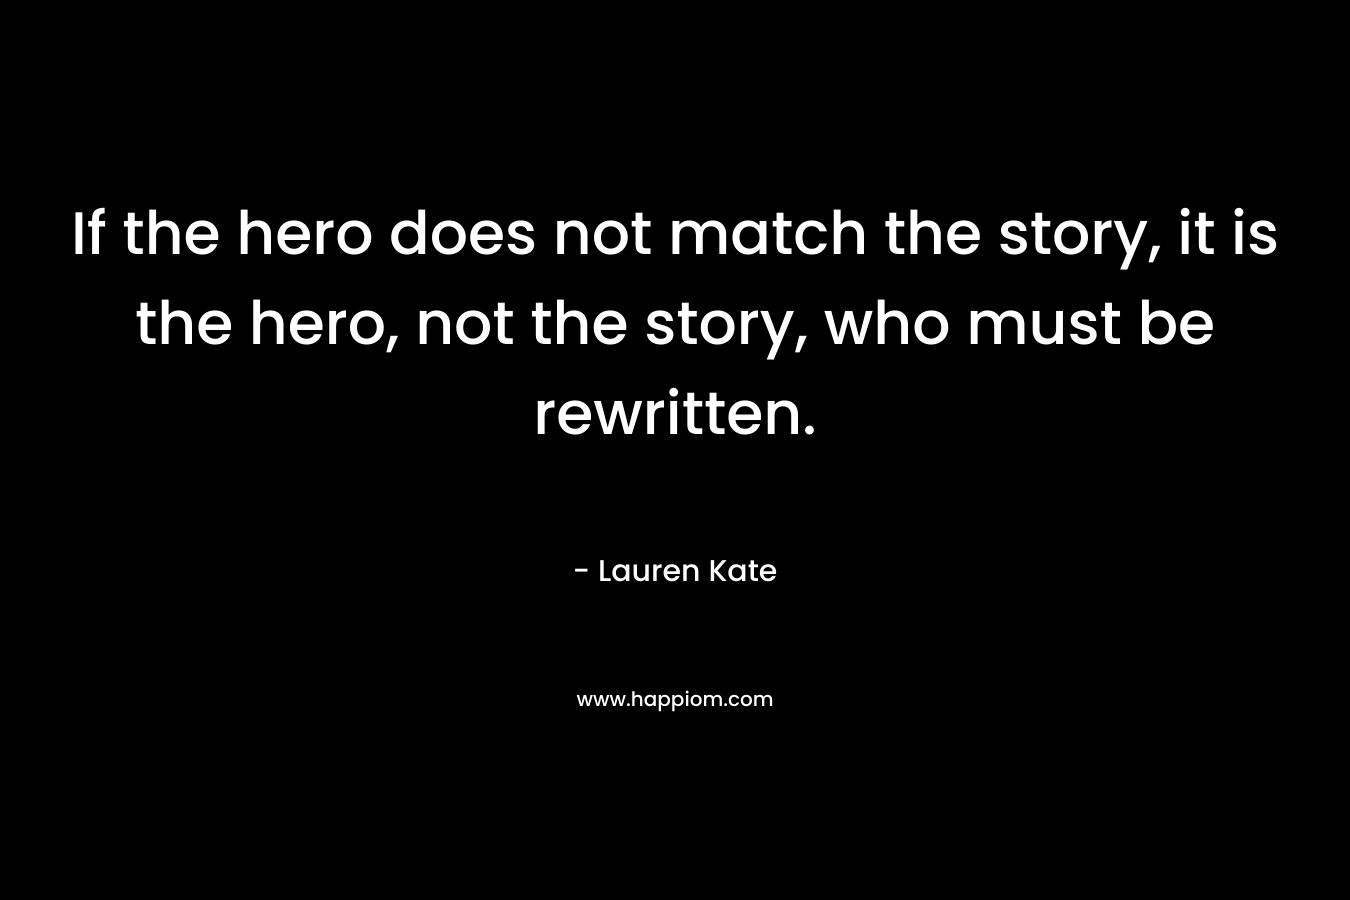 If the hero does not match the story, it is the hero, not the story, who must be rewritten.